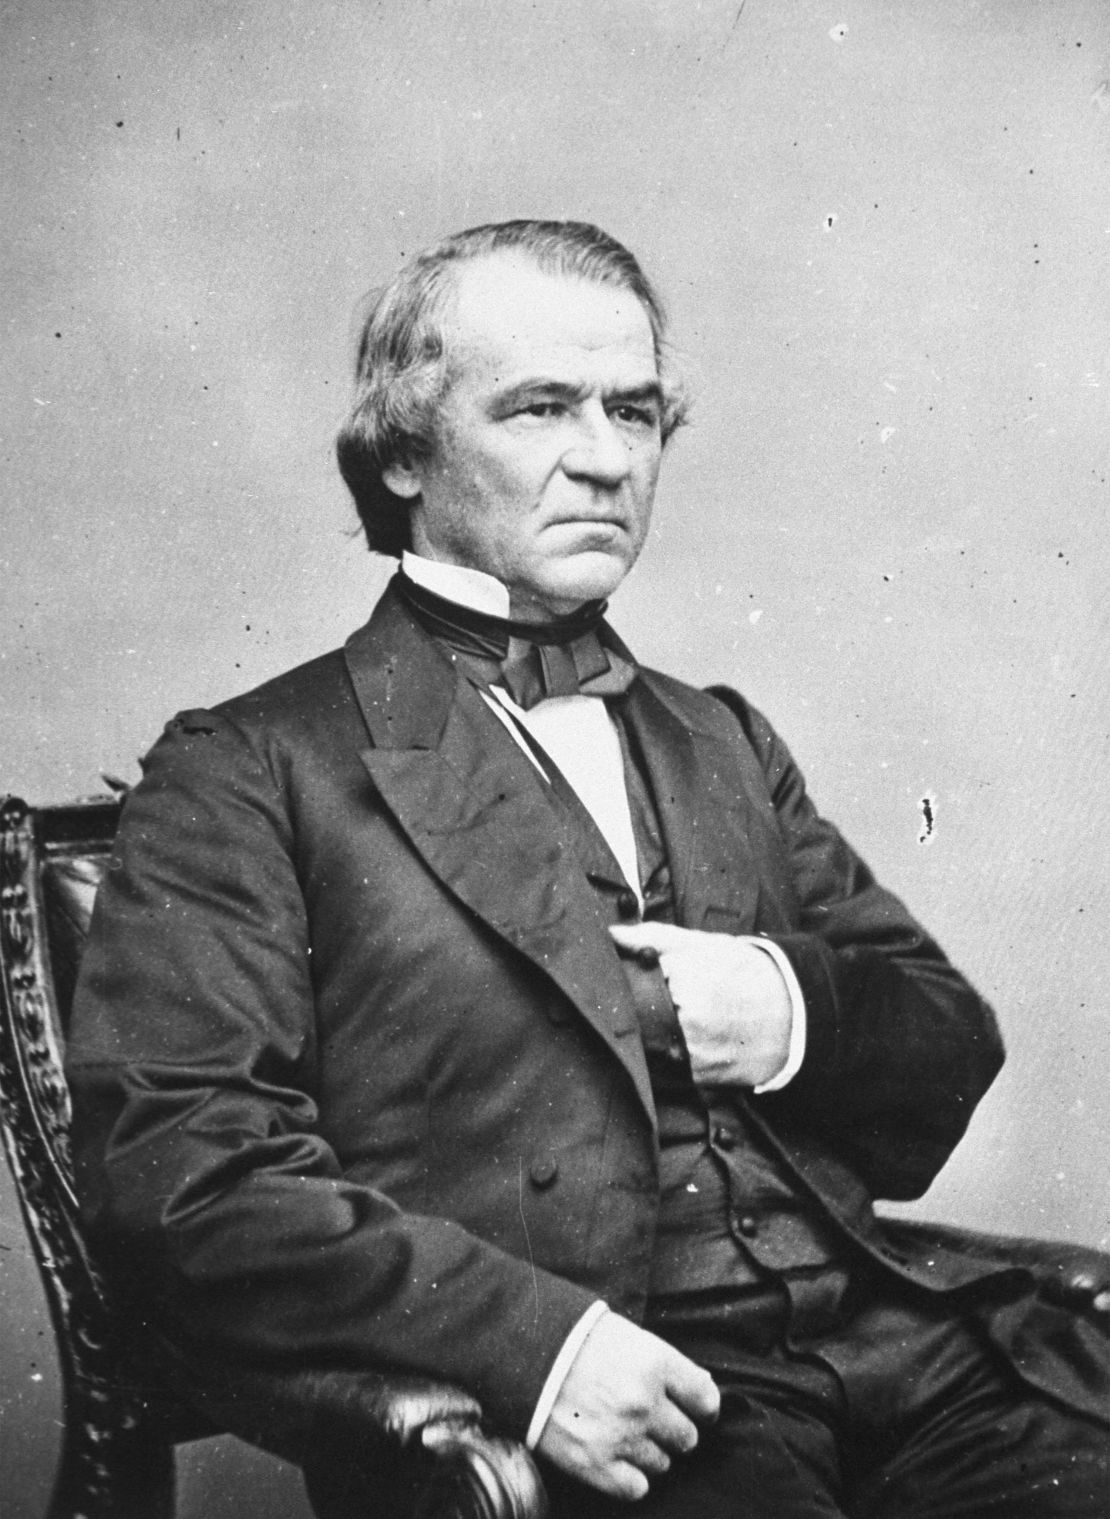 Portrait of Johnson, the 17th president of the United States.